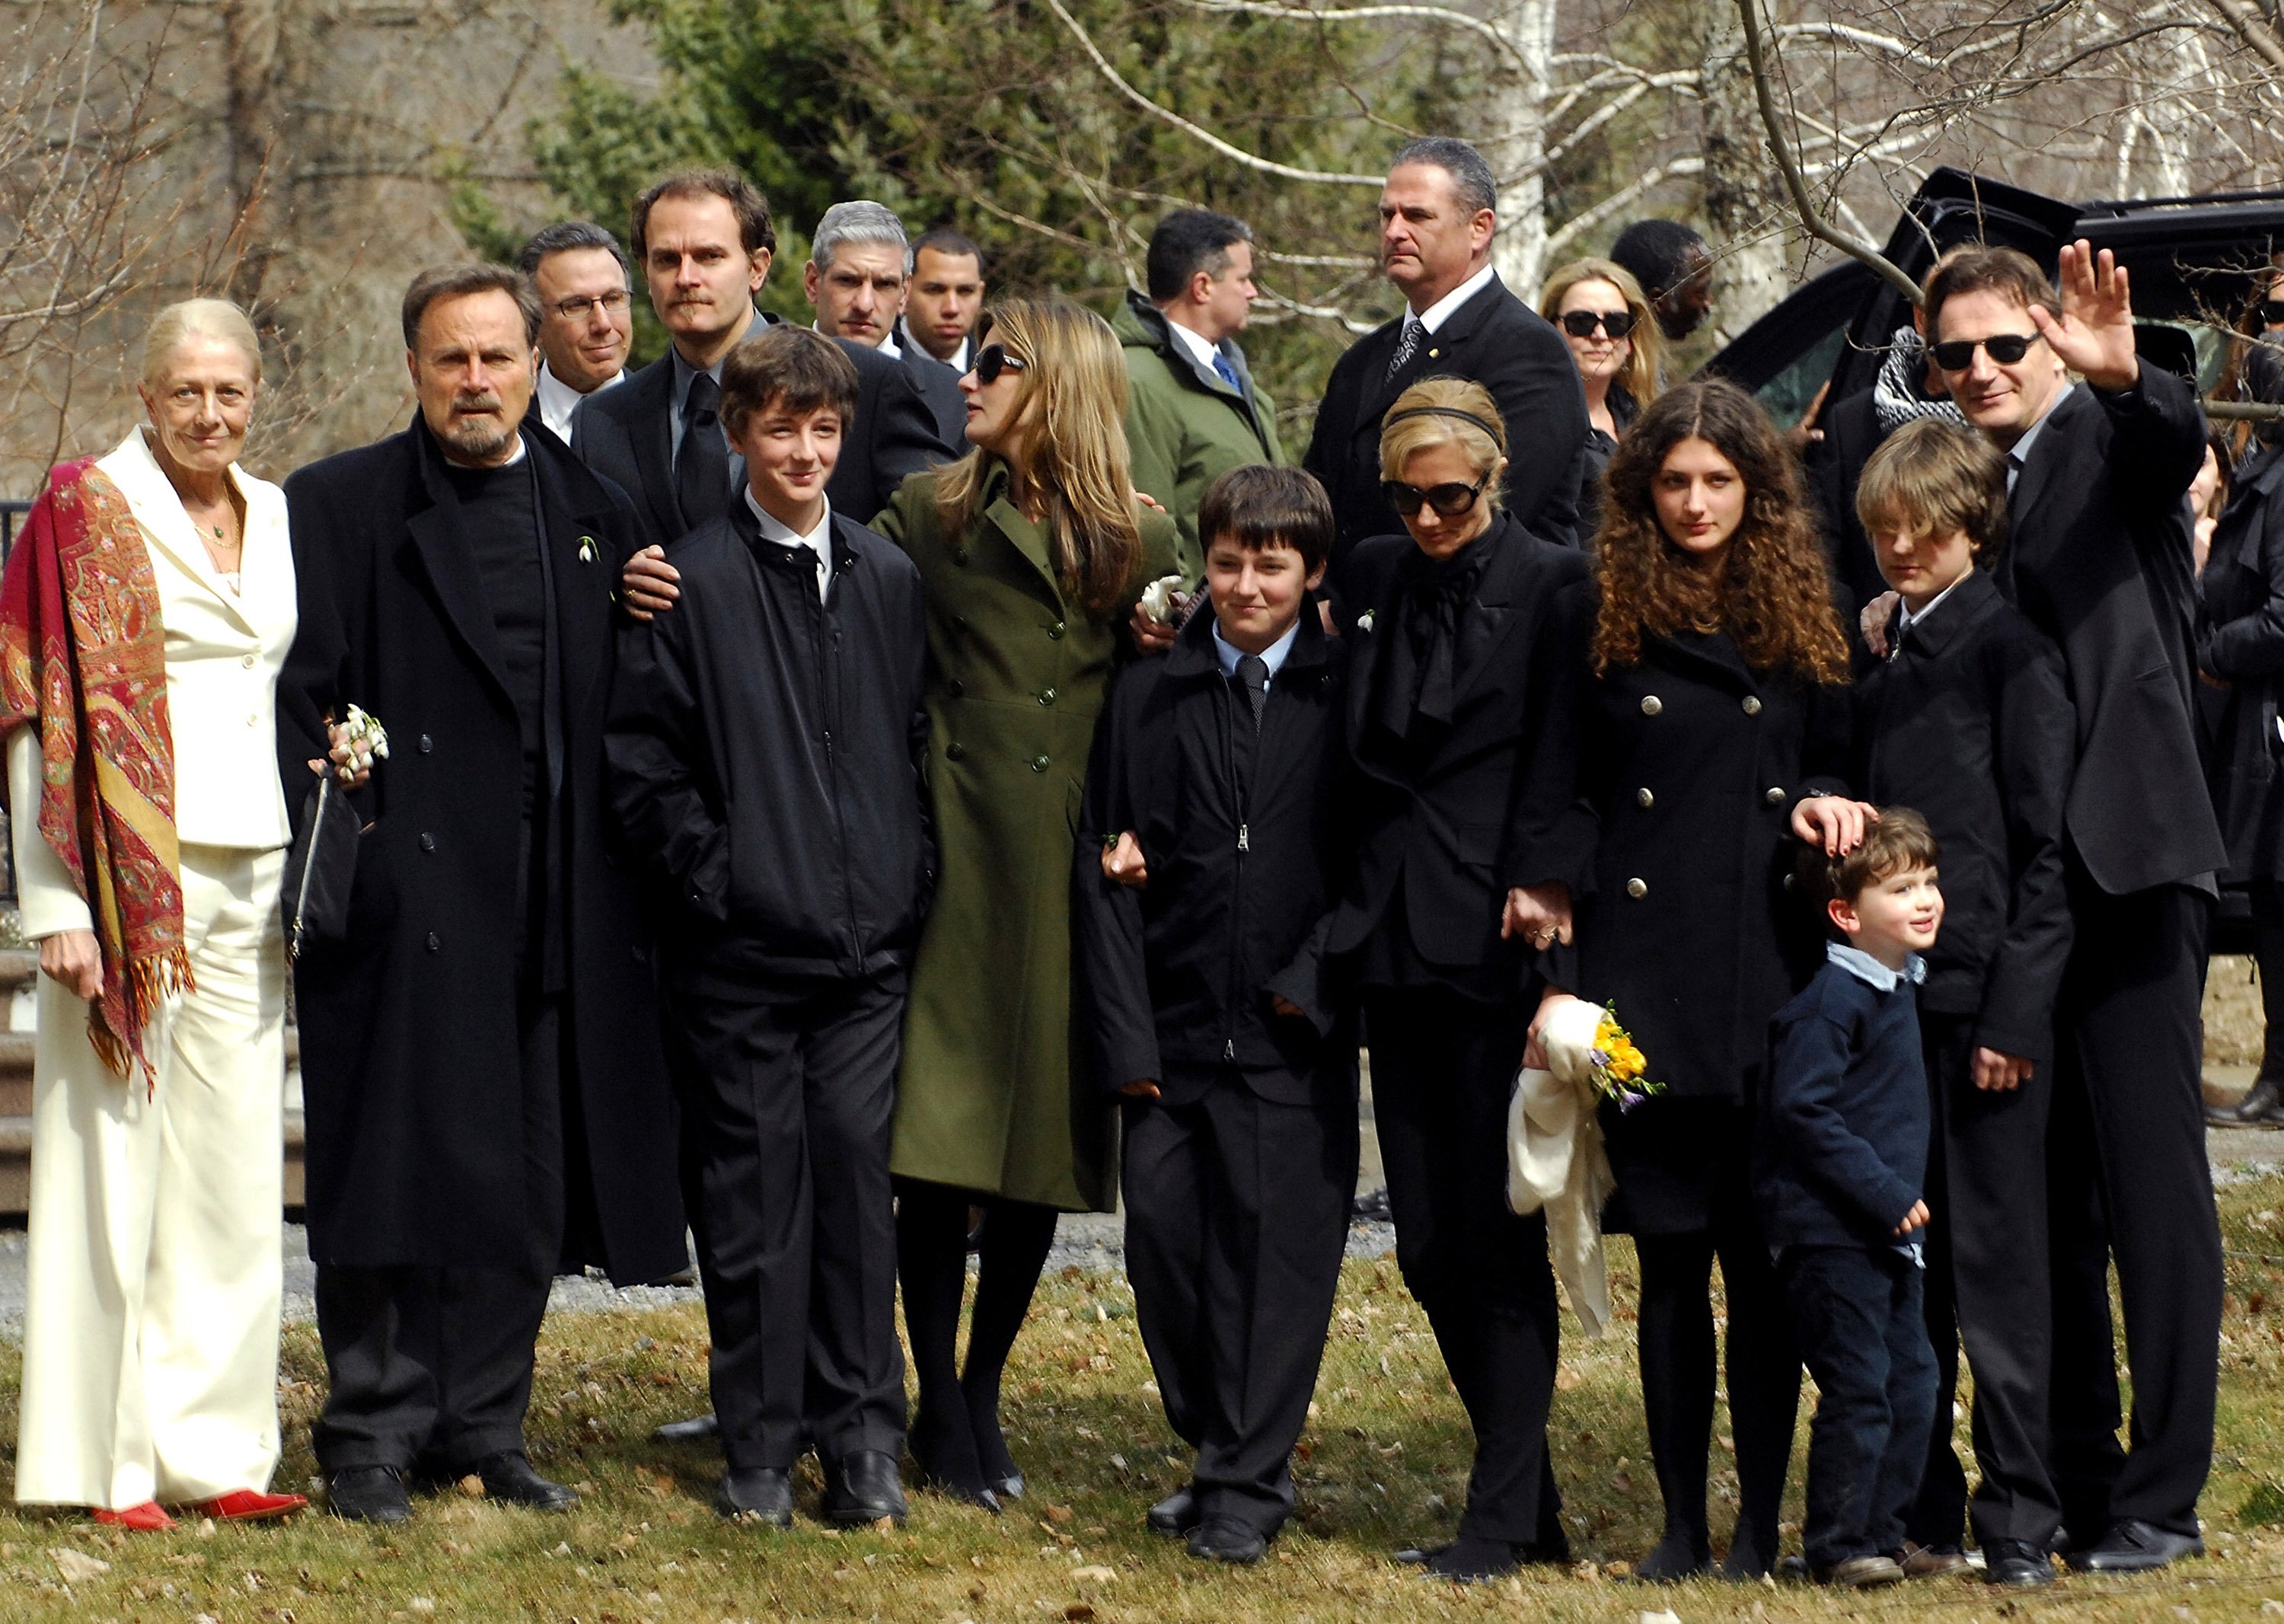 Actress Vanessa Redgrave, Micheal Neeson (3rd-L), Joely Richardson (6th-L), Daisy Bevan (7th-L), Daniel Neeson (2nd-L) and Liam Neeson (L) pictured together before the funeral of Natasha Richardson at St. Peter's Episcopal Church on March 22, 2009 in Lithgow, New York. / Source: Getty Images